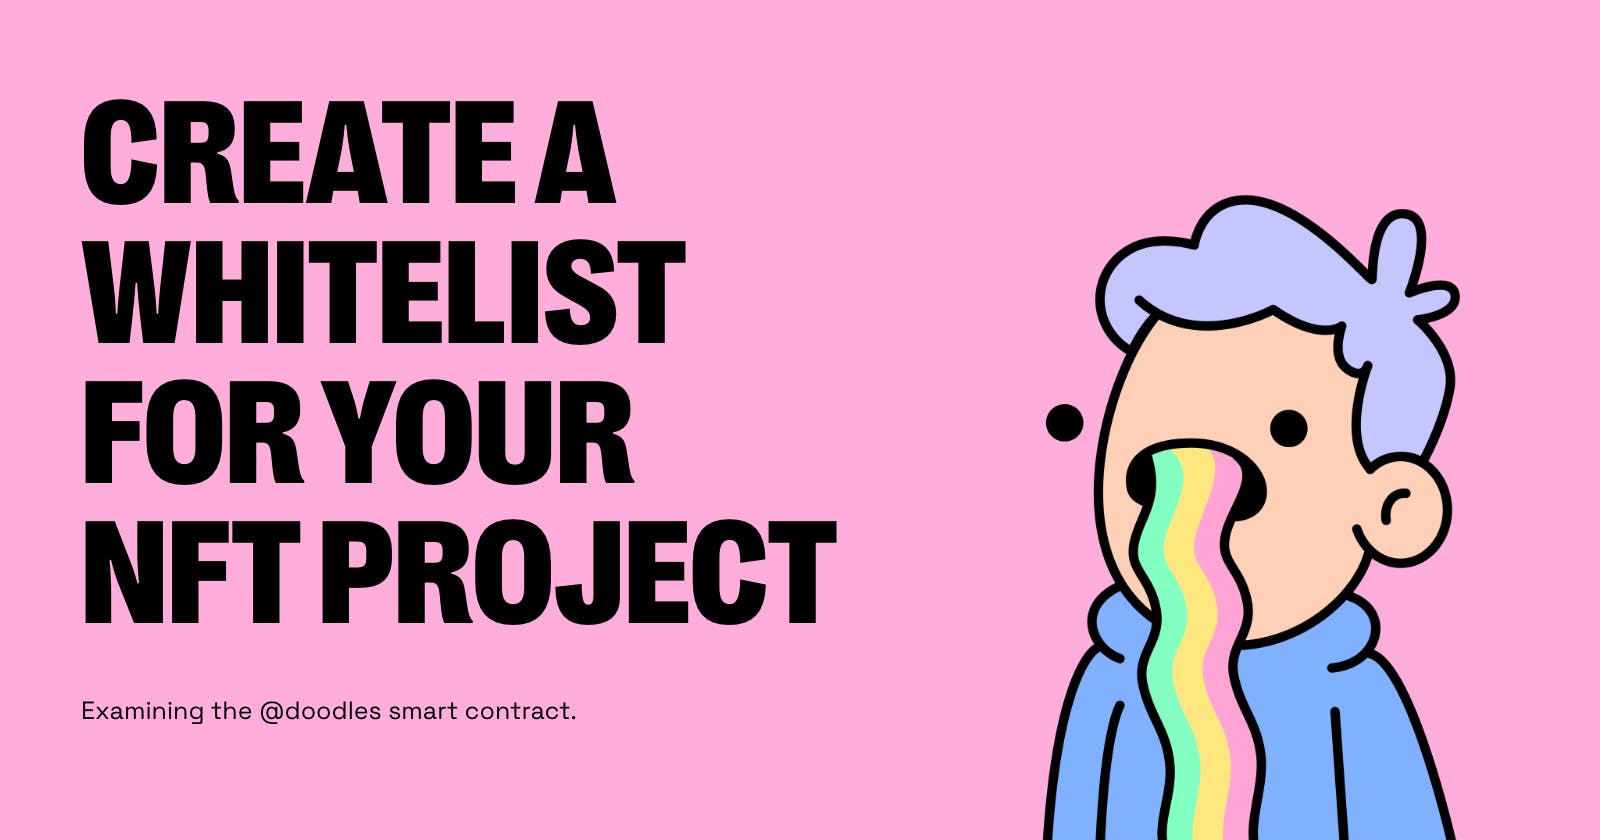 Create a whitelist for your NFT project